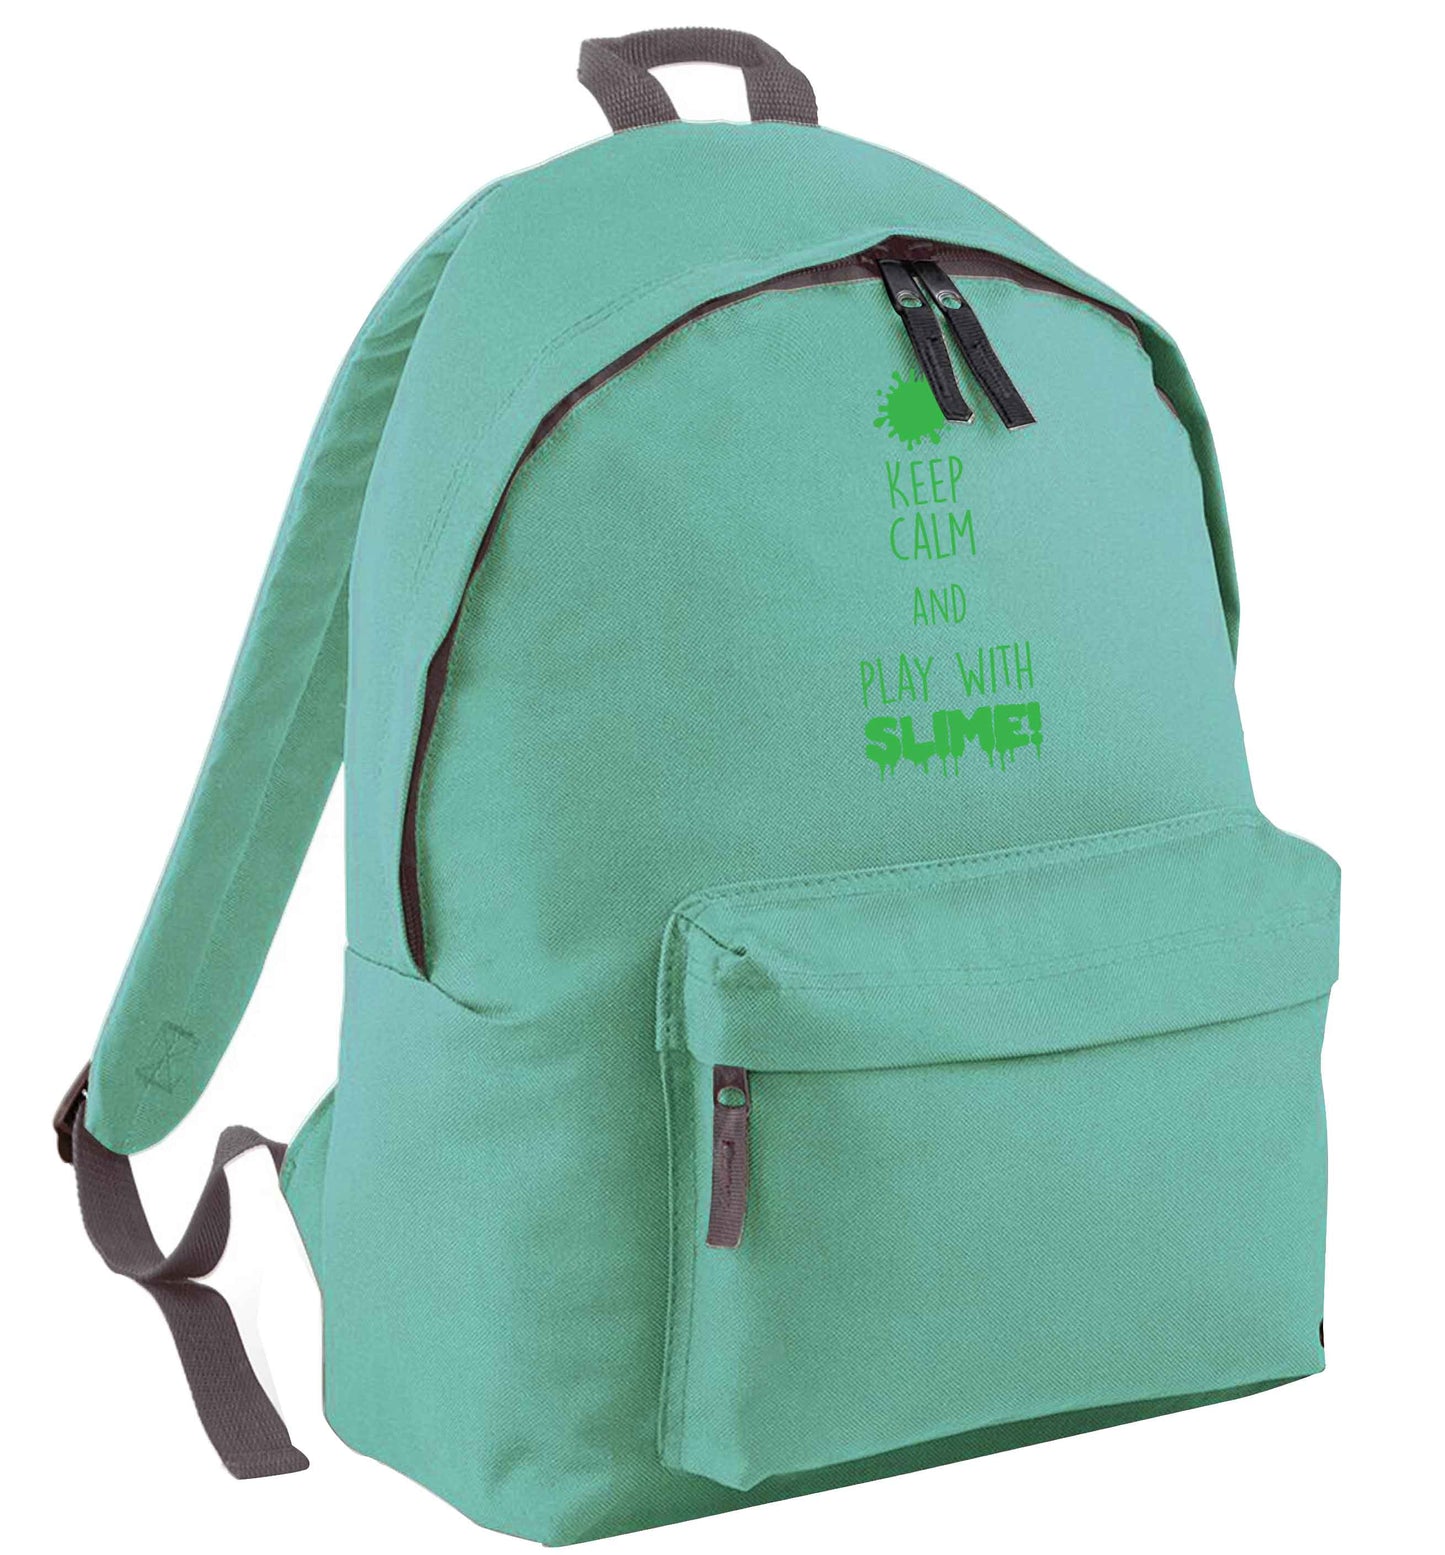 Neon green keep calm and play with slime!mint adults backpack